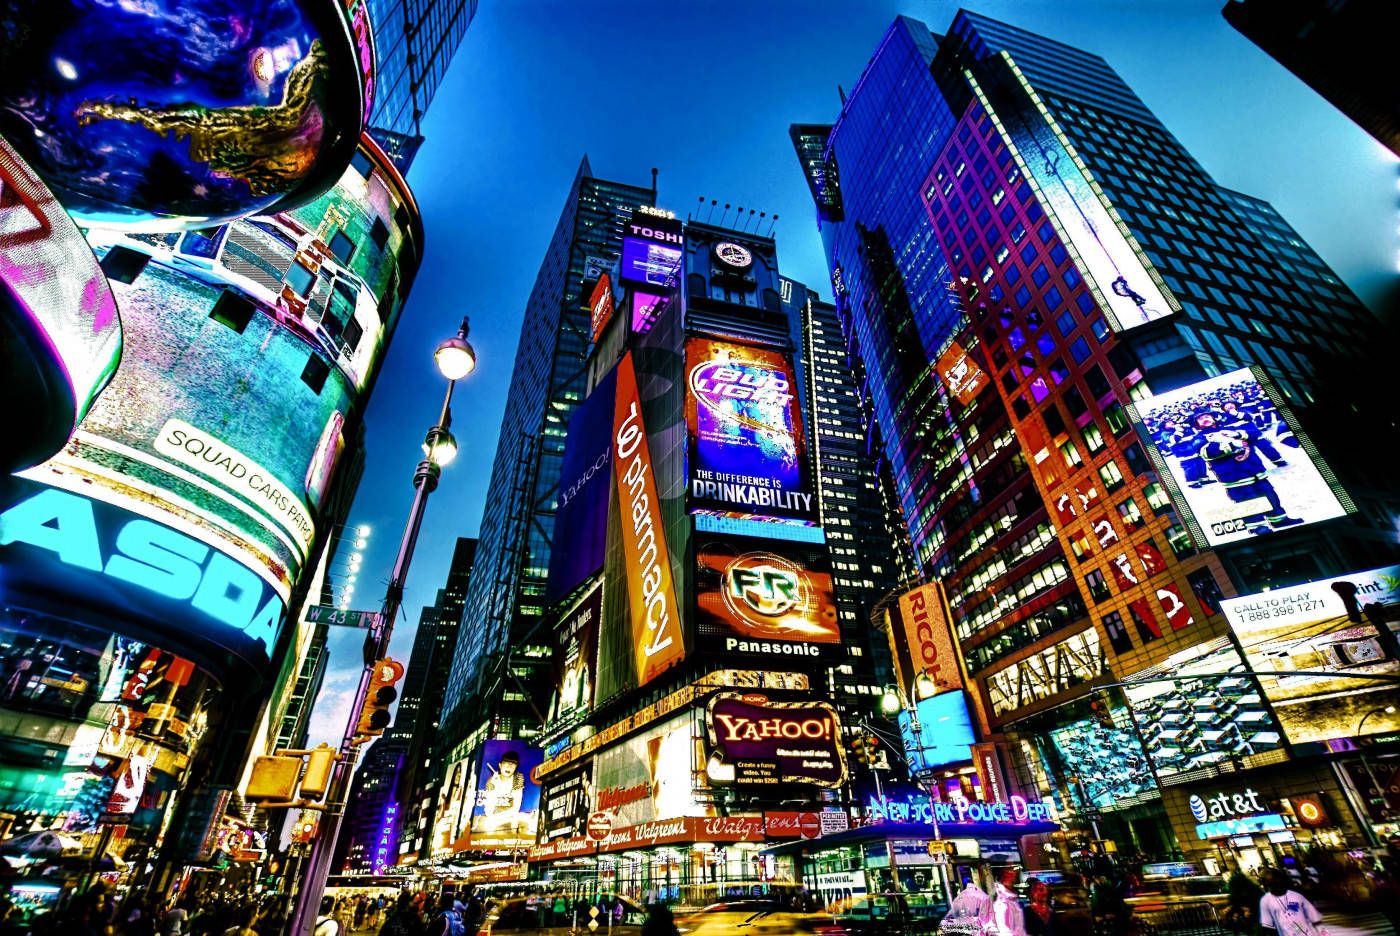 Broadway is a city that never sleeps. - Broadway